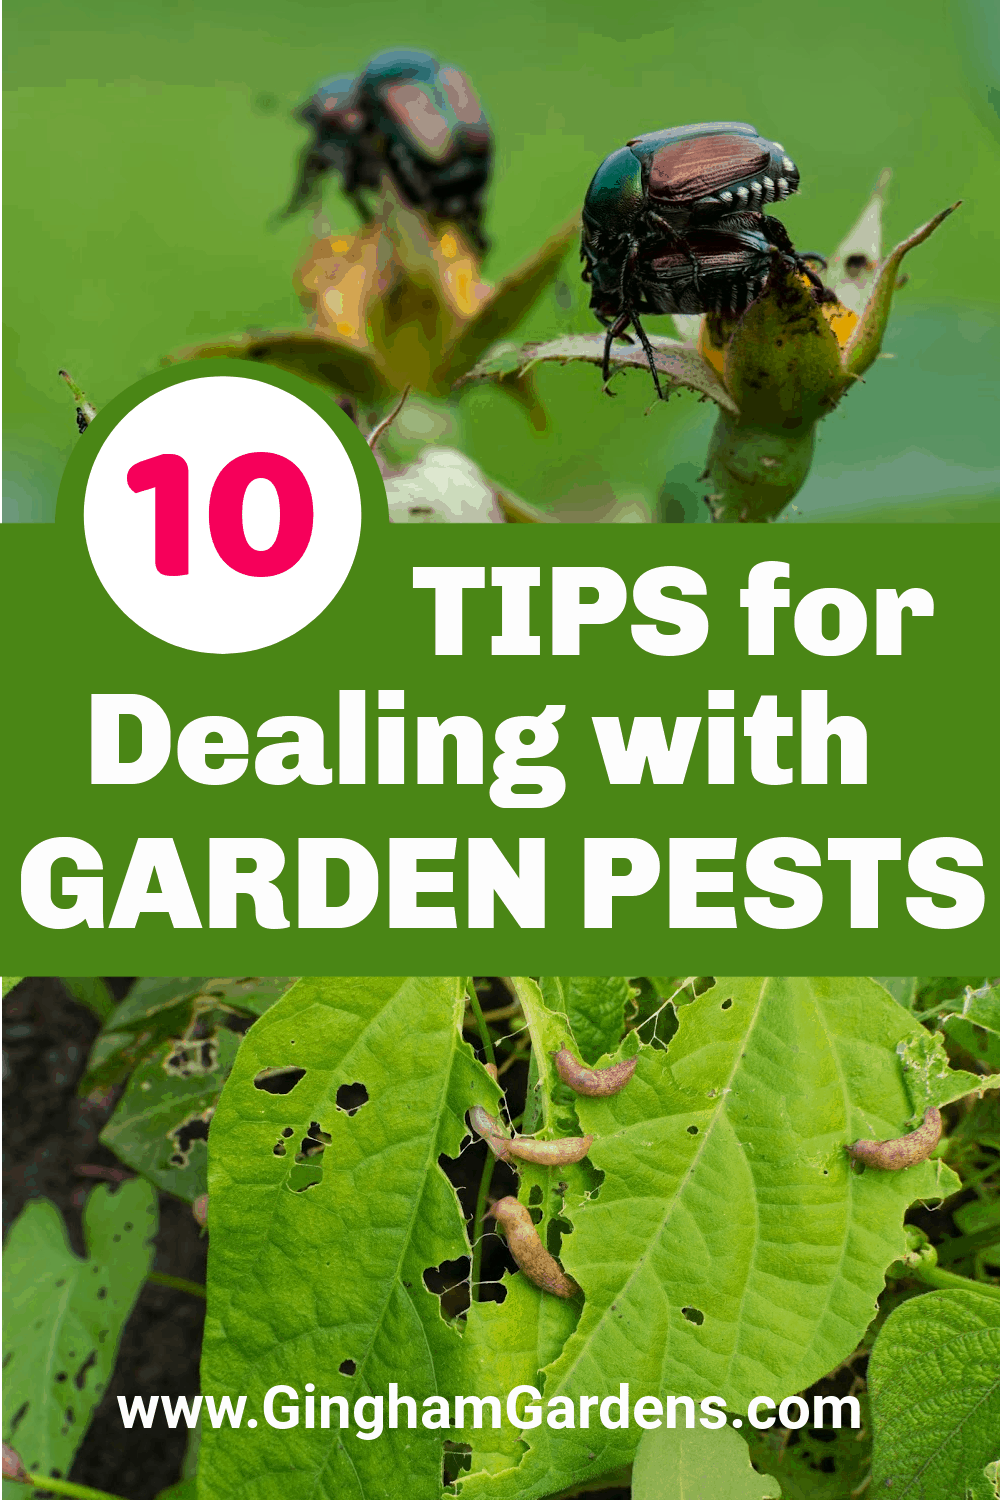 Images of bugs on plants with text overlay - 10 Tips for Dealing with Garden Pests